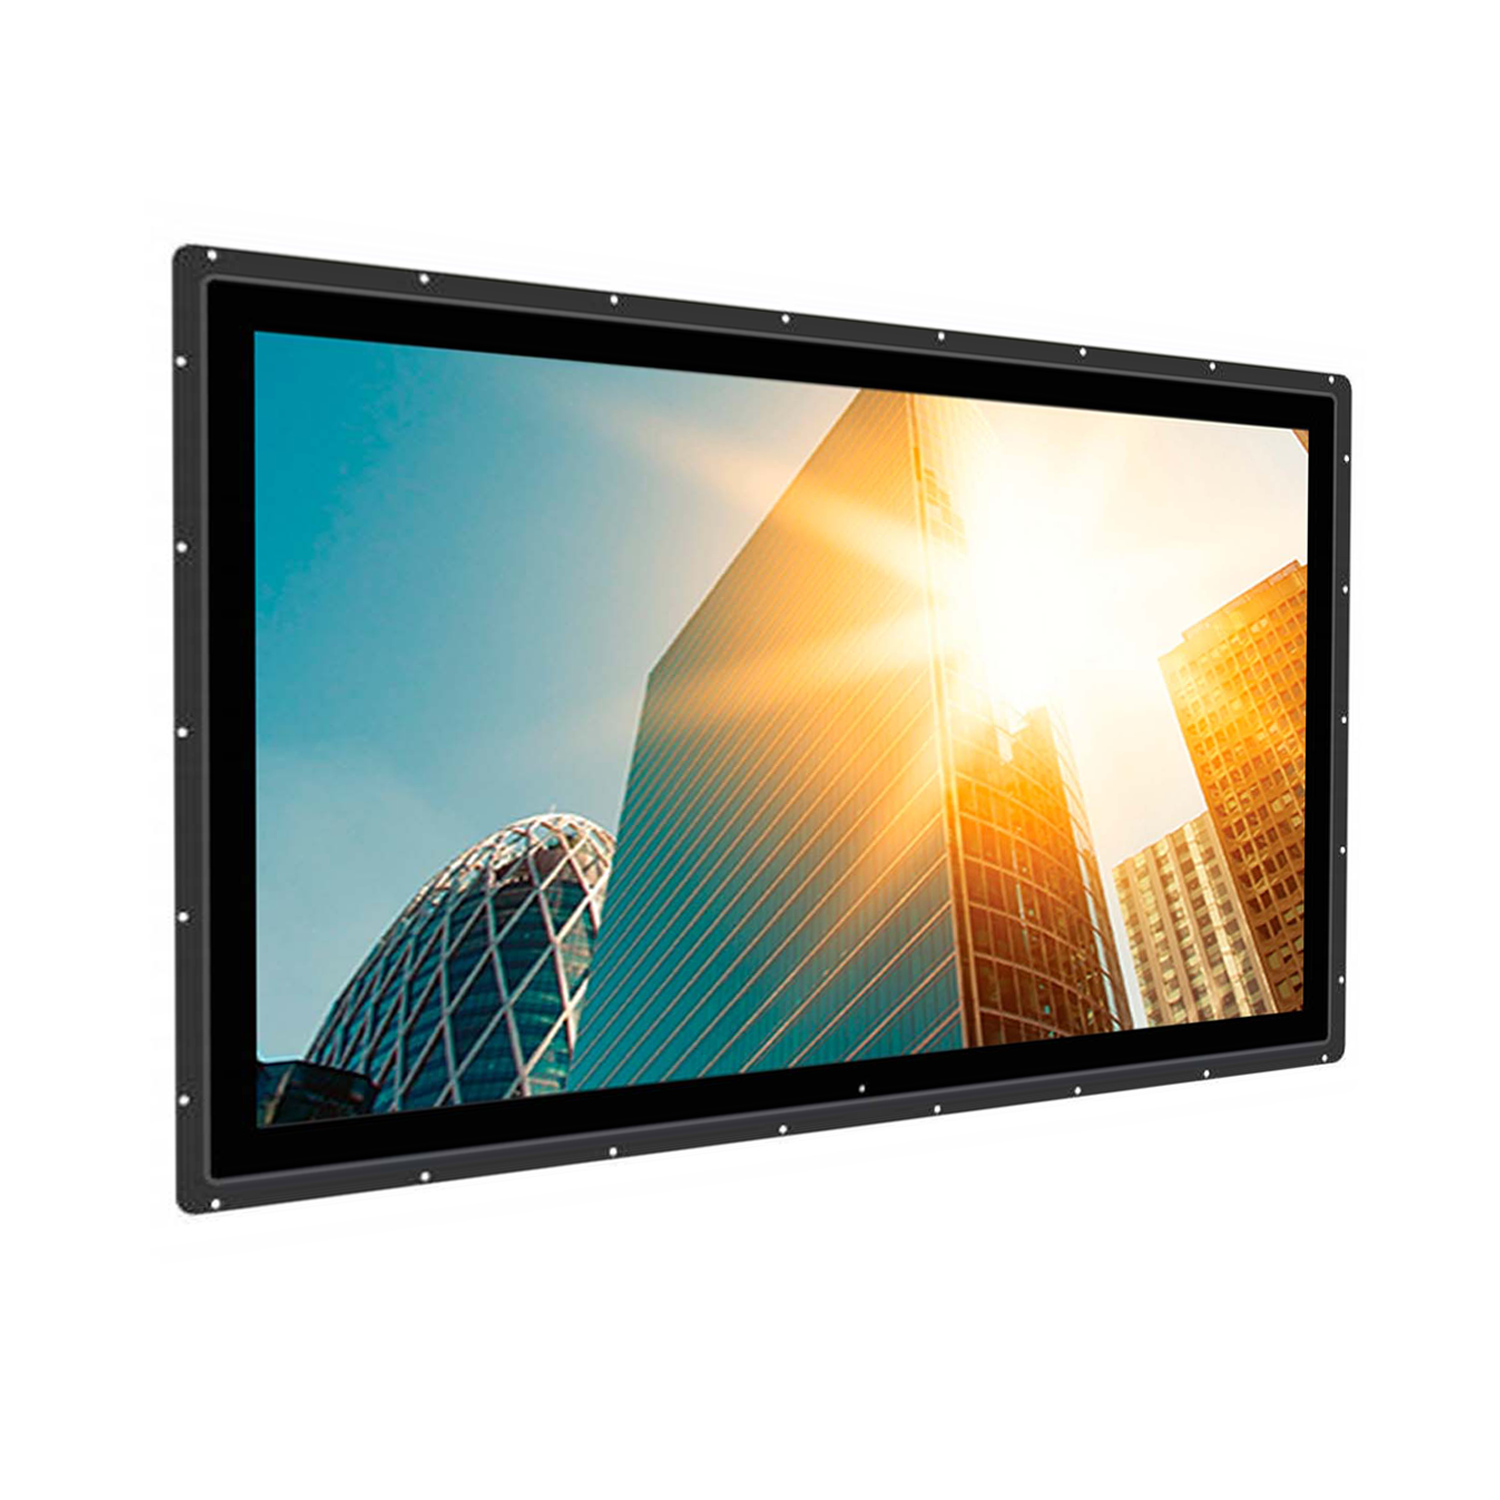 INDUSTRIAL OPEN FRAME HIGH BRIGHT TOUCH MONITOR KEETOUCH 32" KT-320-CHWSGF3